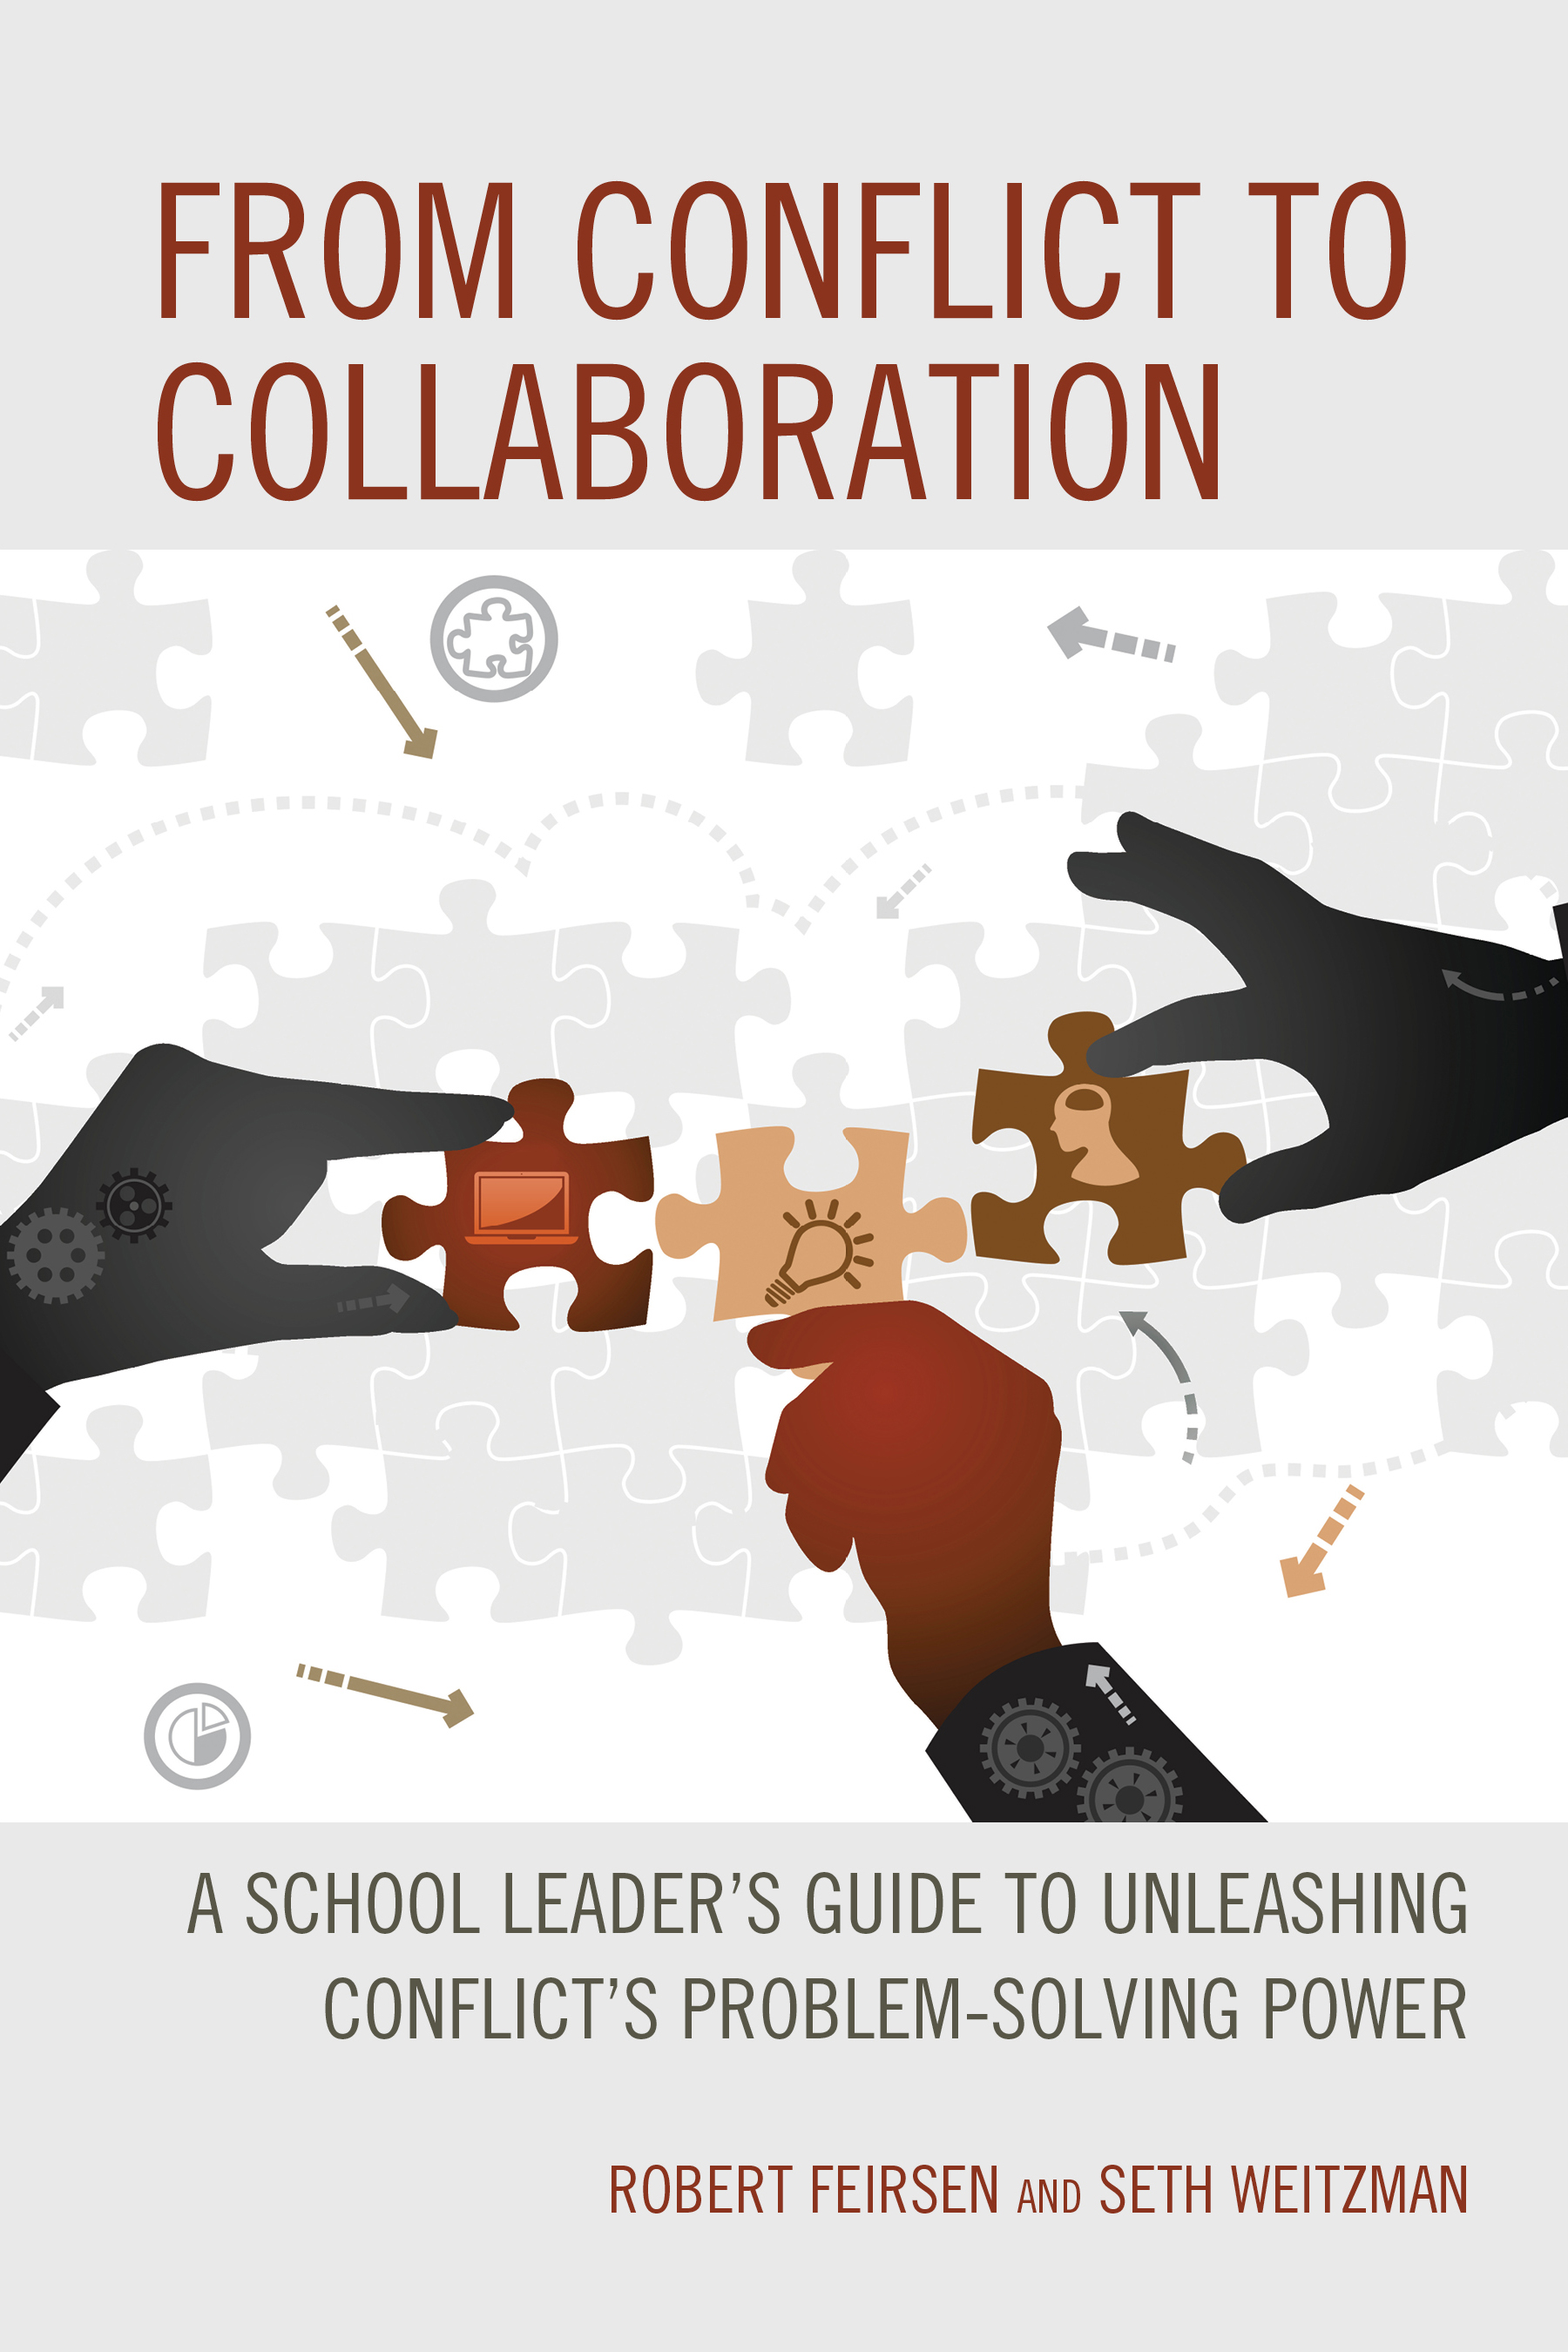 From Conflict to Collaboration: A School Leader's Guide to Unleashing Conflict's Problem-Solving Power